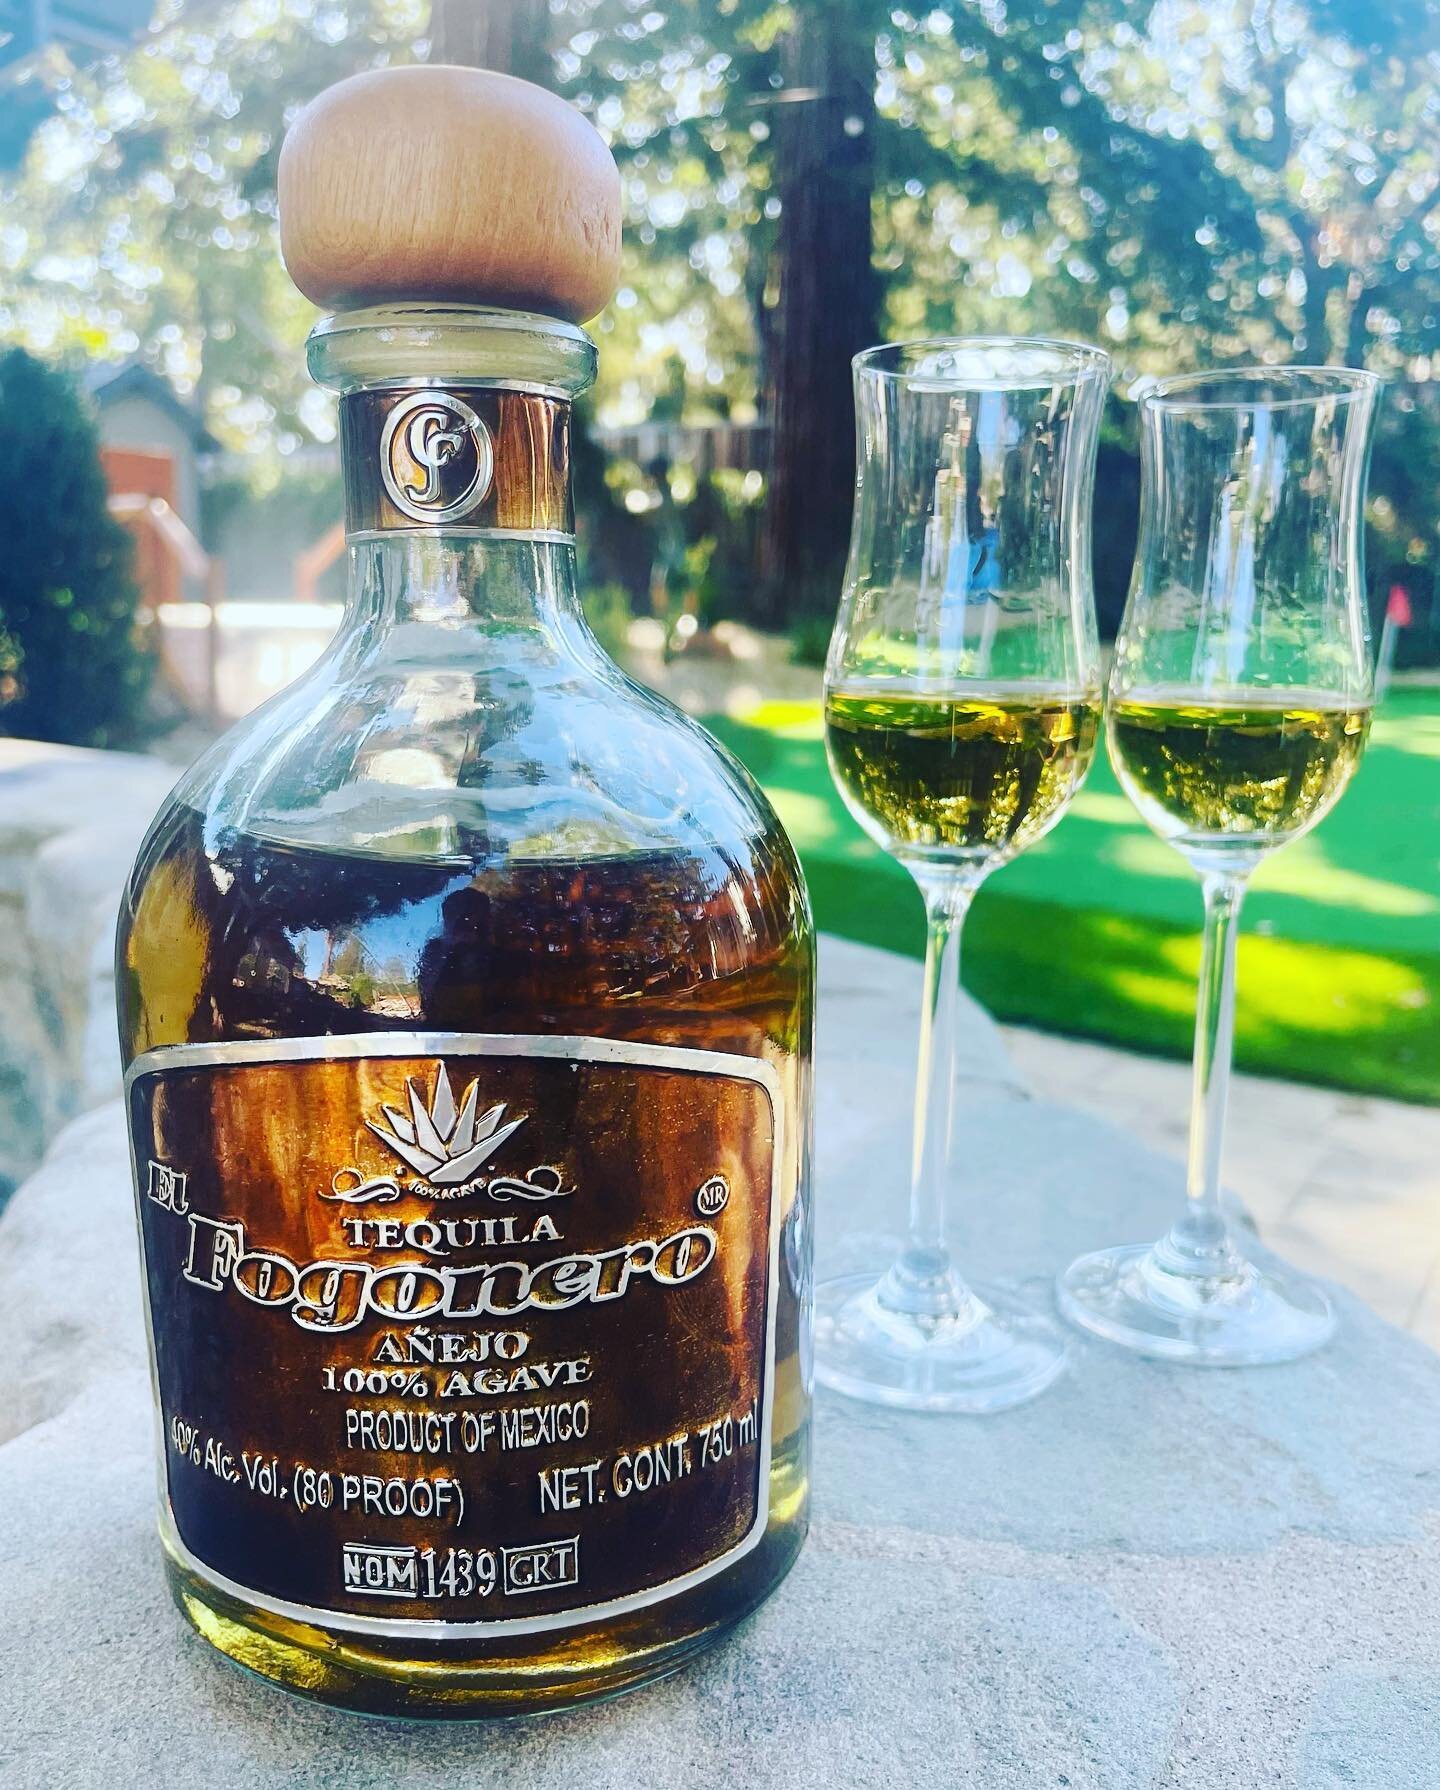 The perfect tequila to share with a friend 😍 Available at Raley&rsquo;s 🥂#anejo #oakandagave #raleys #thebesttequila #sipdontshoot